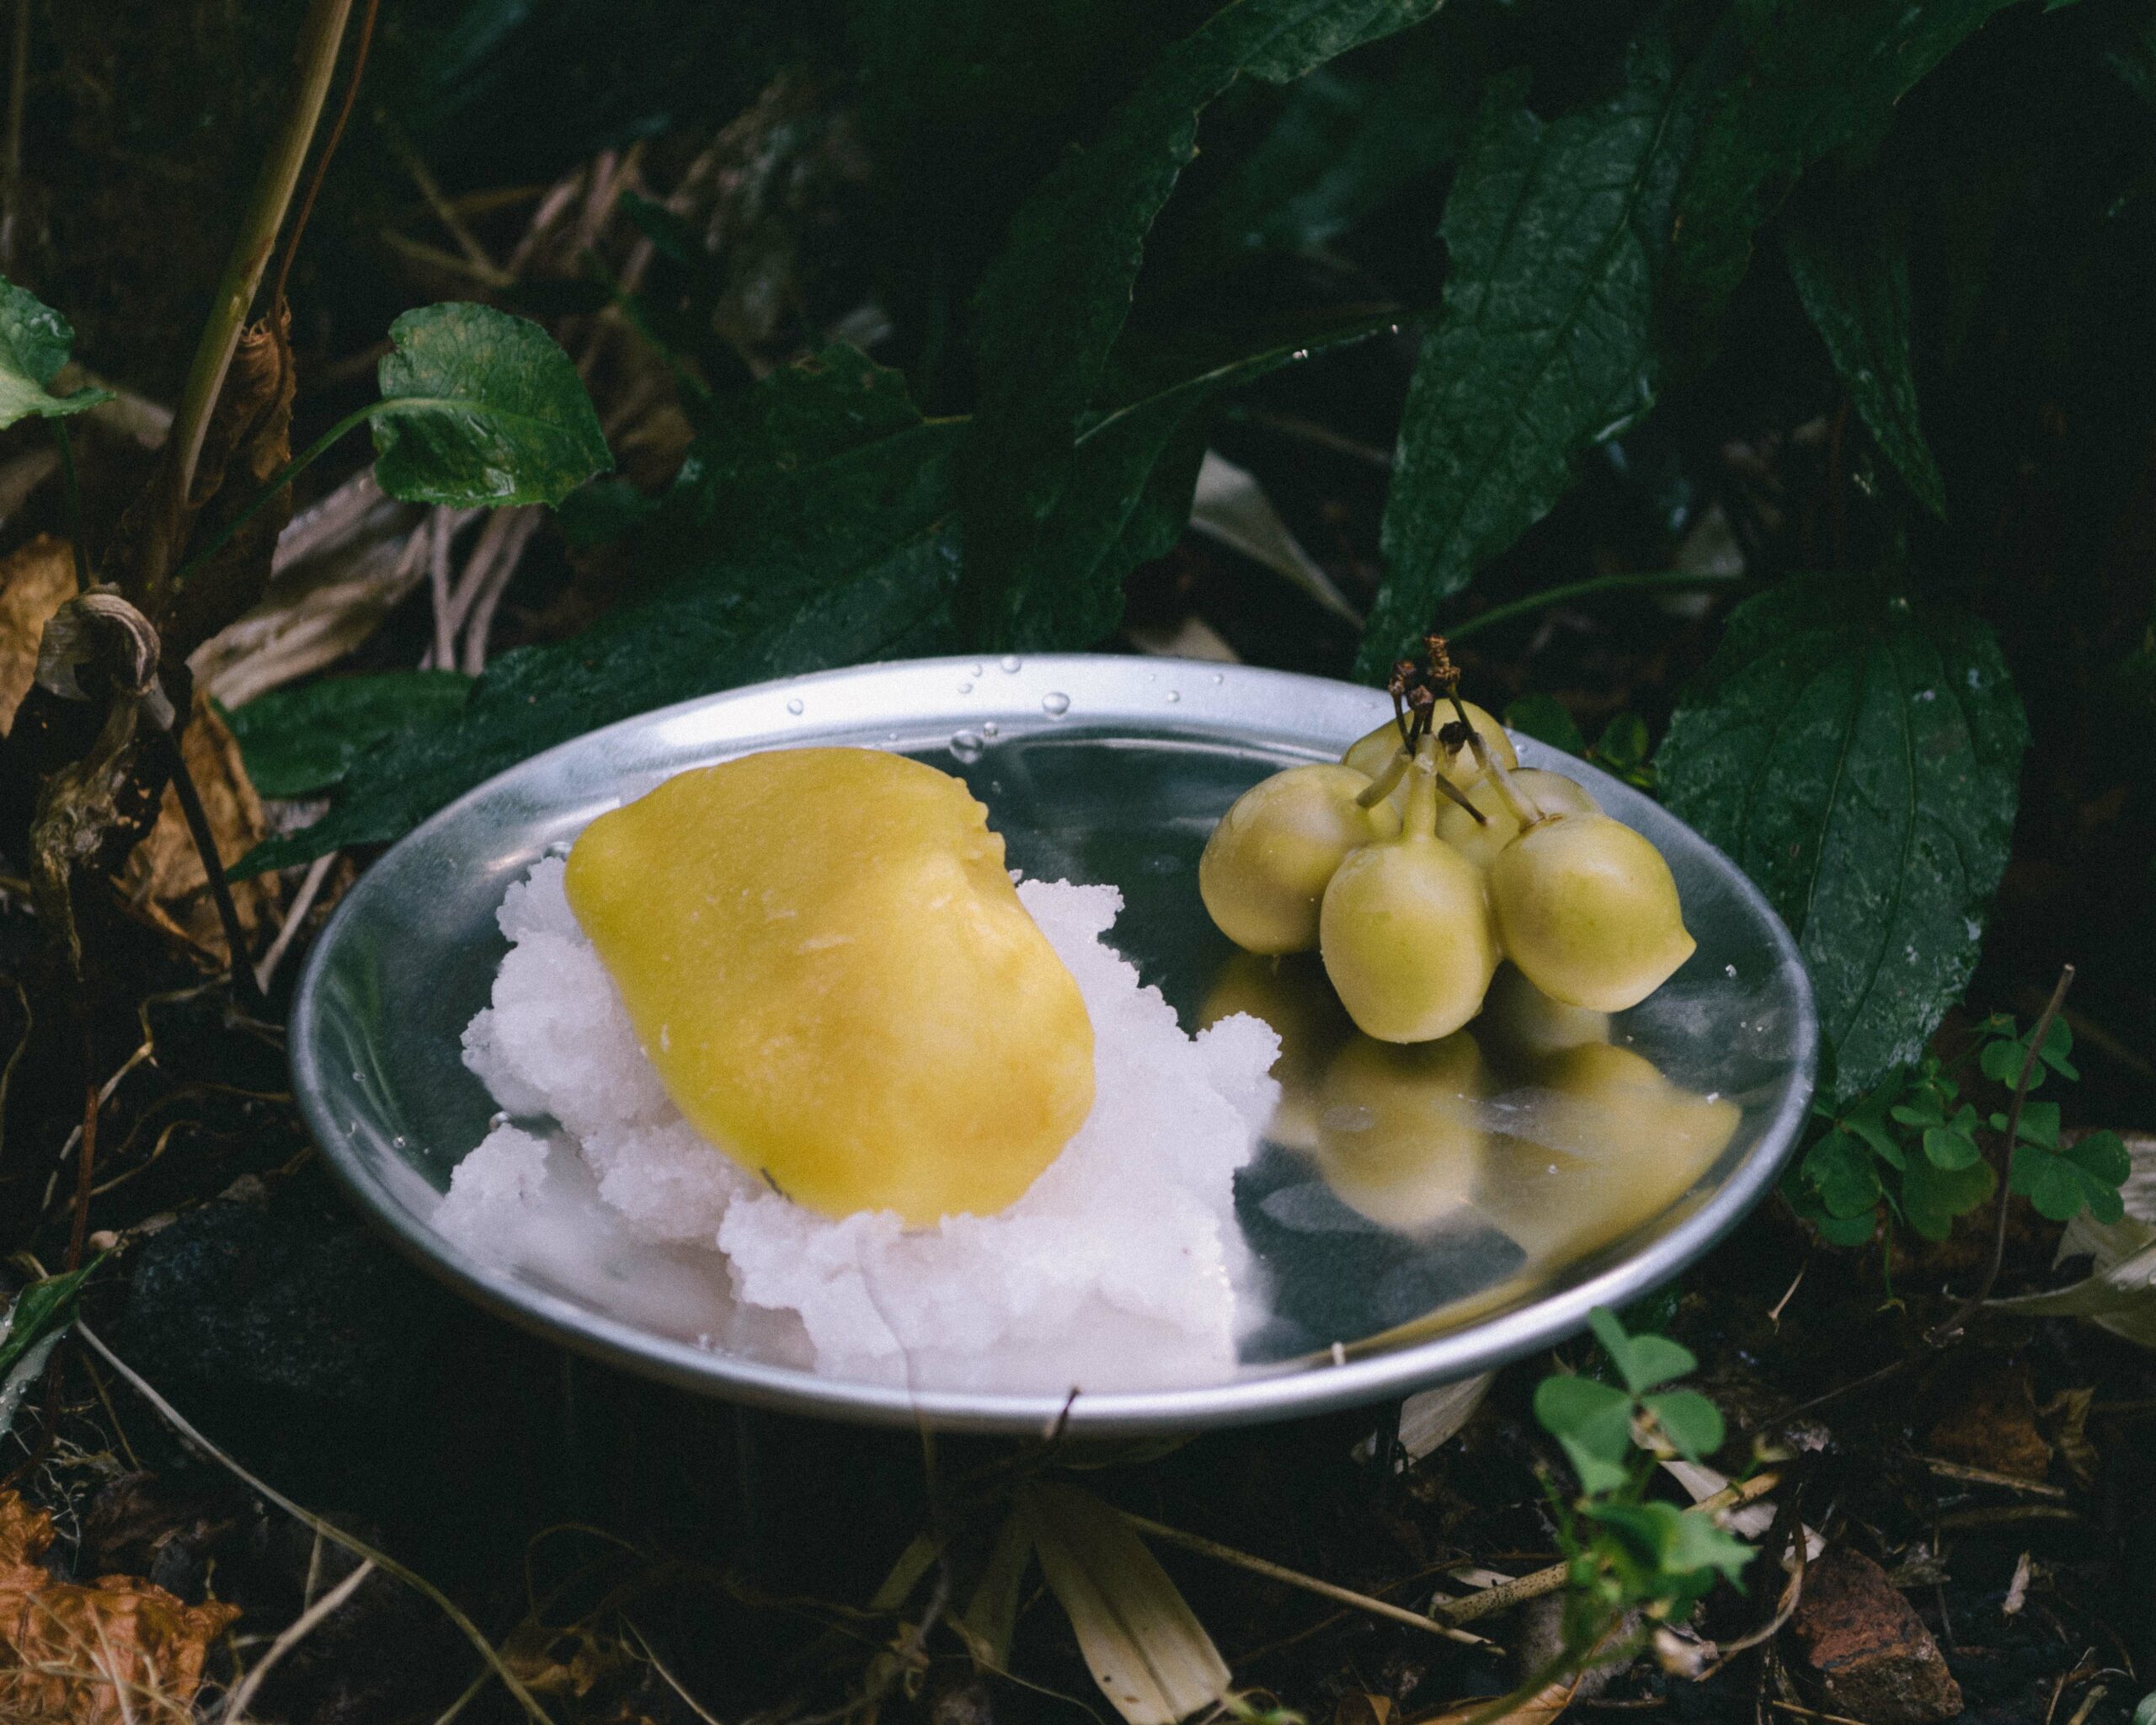 A bundle of fruits coated in olive-colored wax sits next to another yellow beeswax-coated mound which sits on a bed of crushed ice. They are presented on a reflective silver platter found amongst lush greenery.